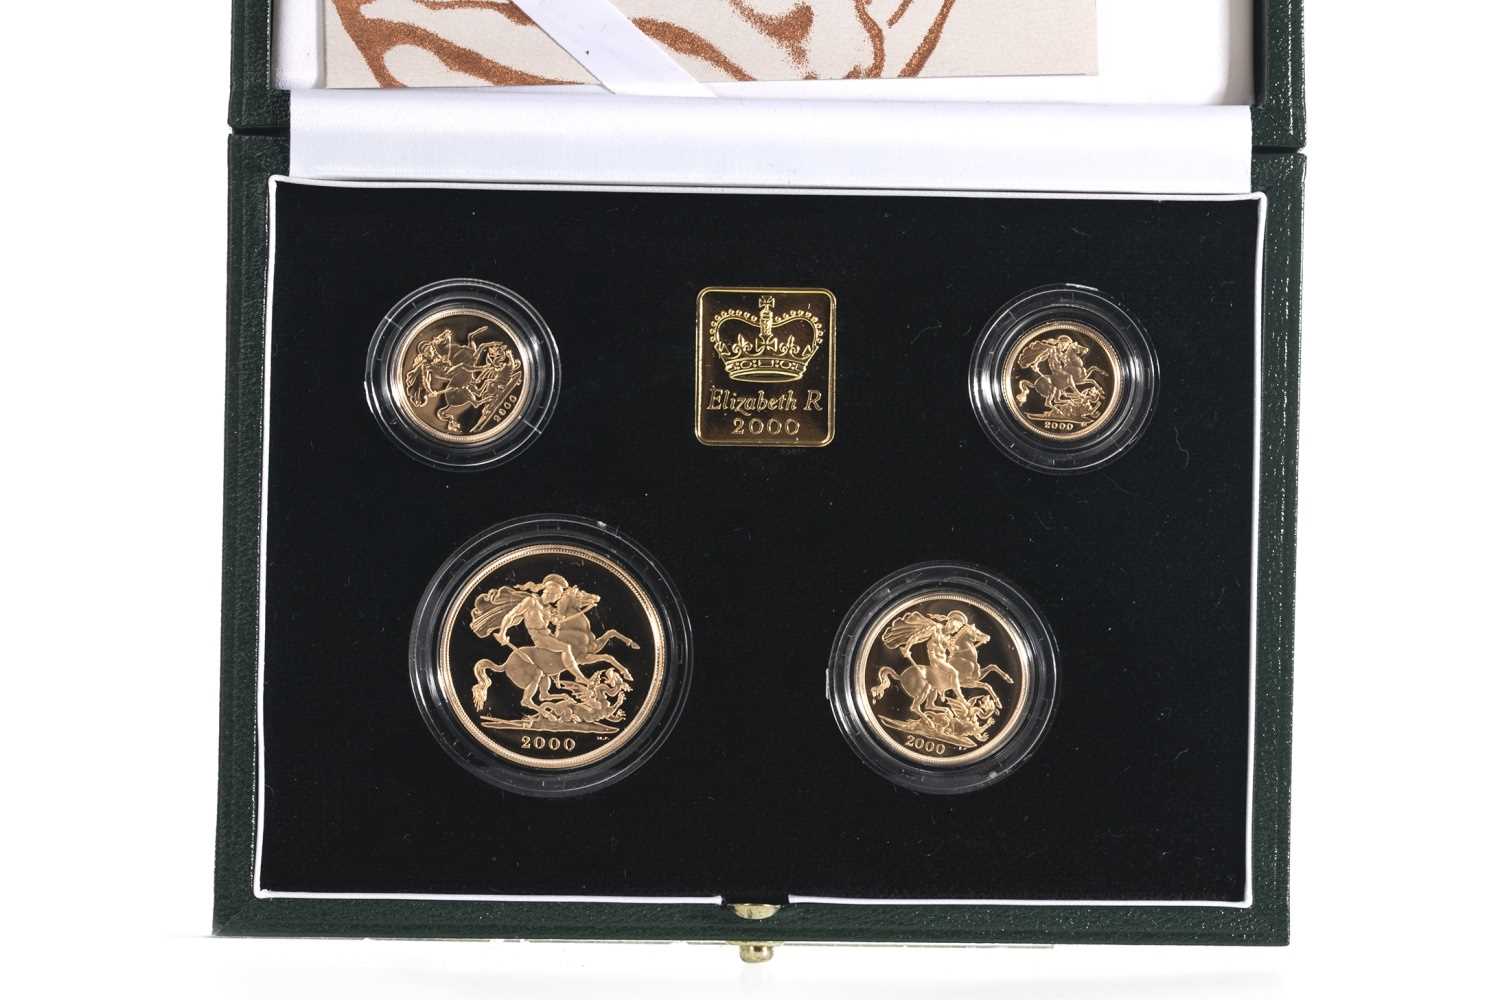 Lot 37 - 2000 GOLD PROOF UK SOVEREIGN FOUR COIN SET